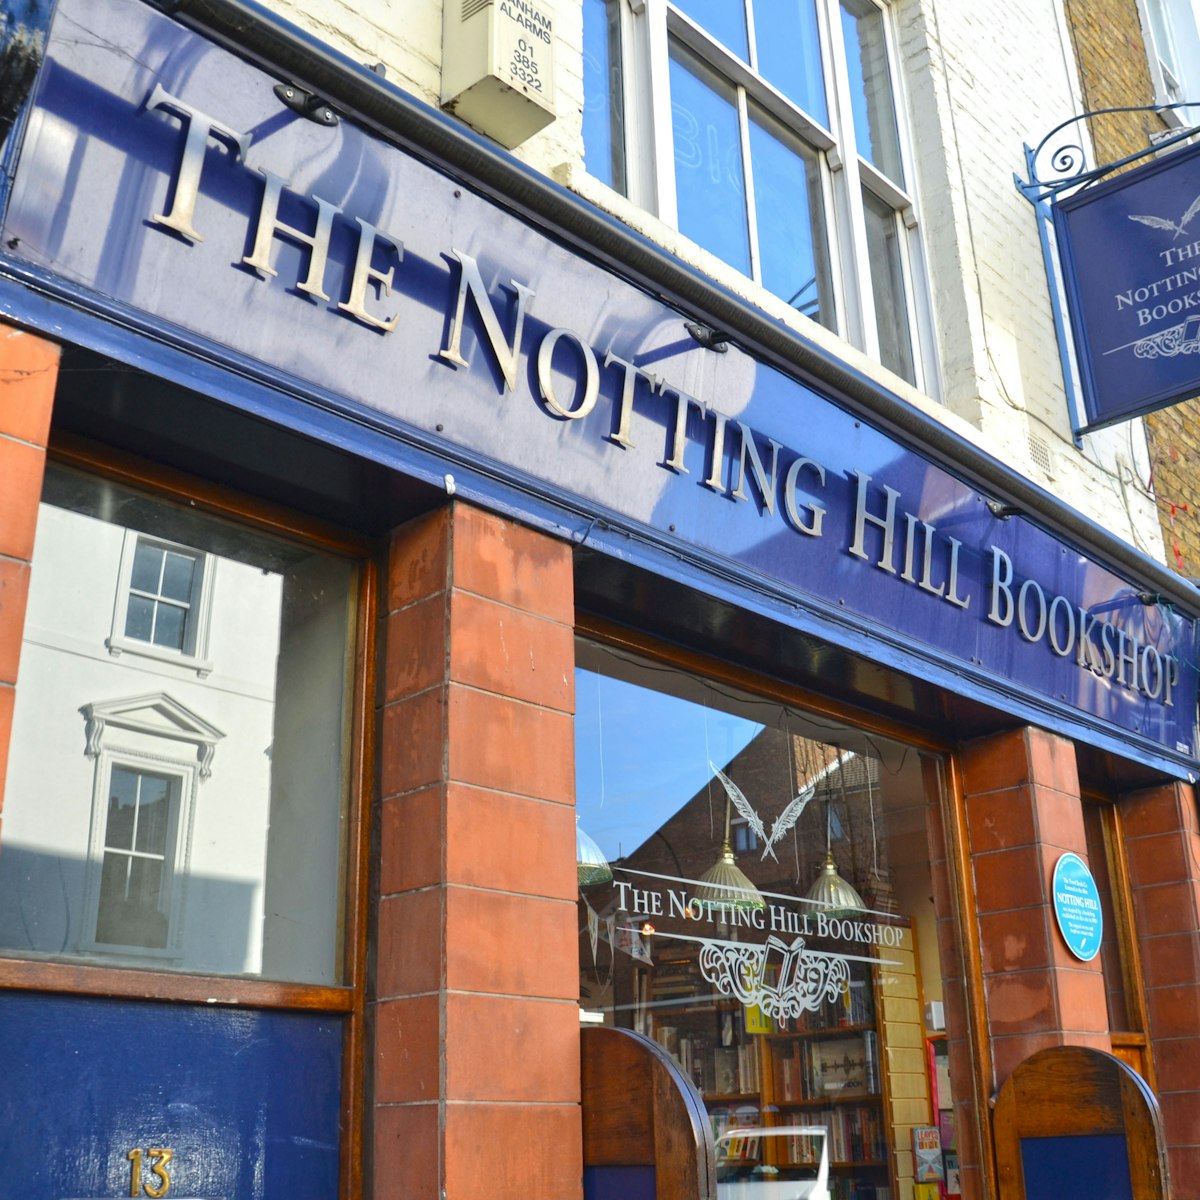 The Notting Hill Book Shop was made famous by the Hugh Grant film Notting Hill